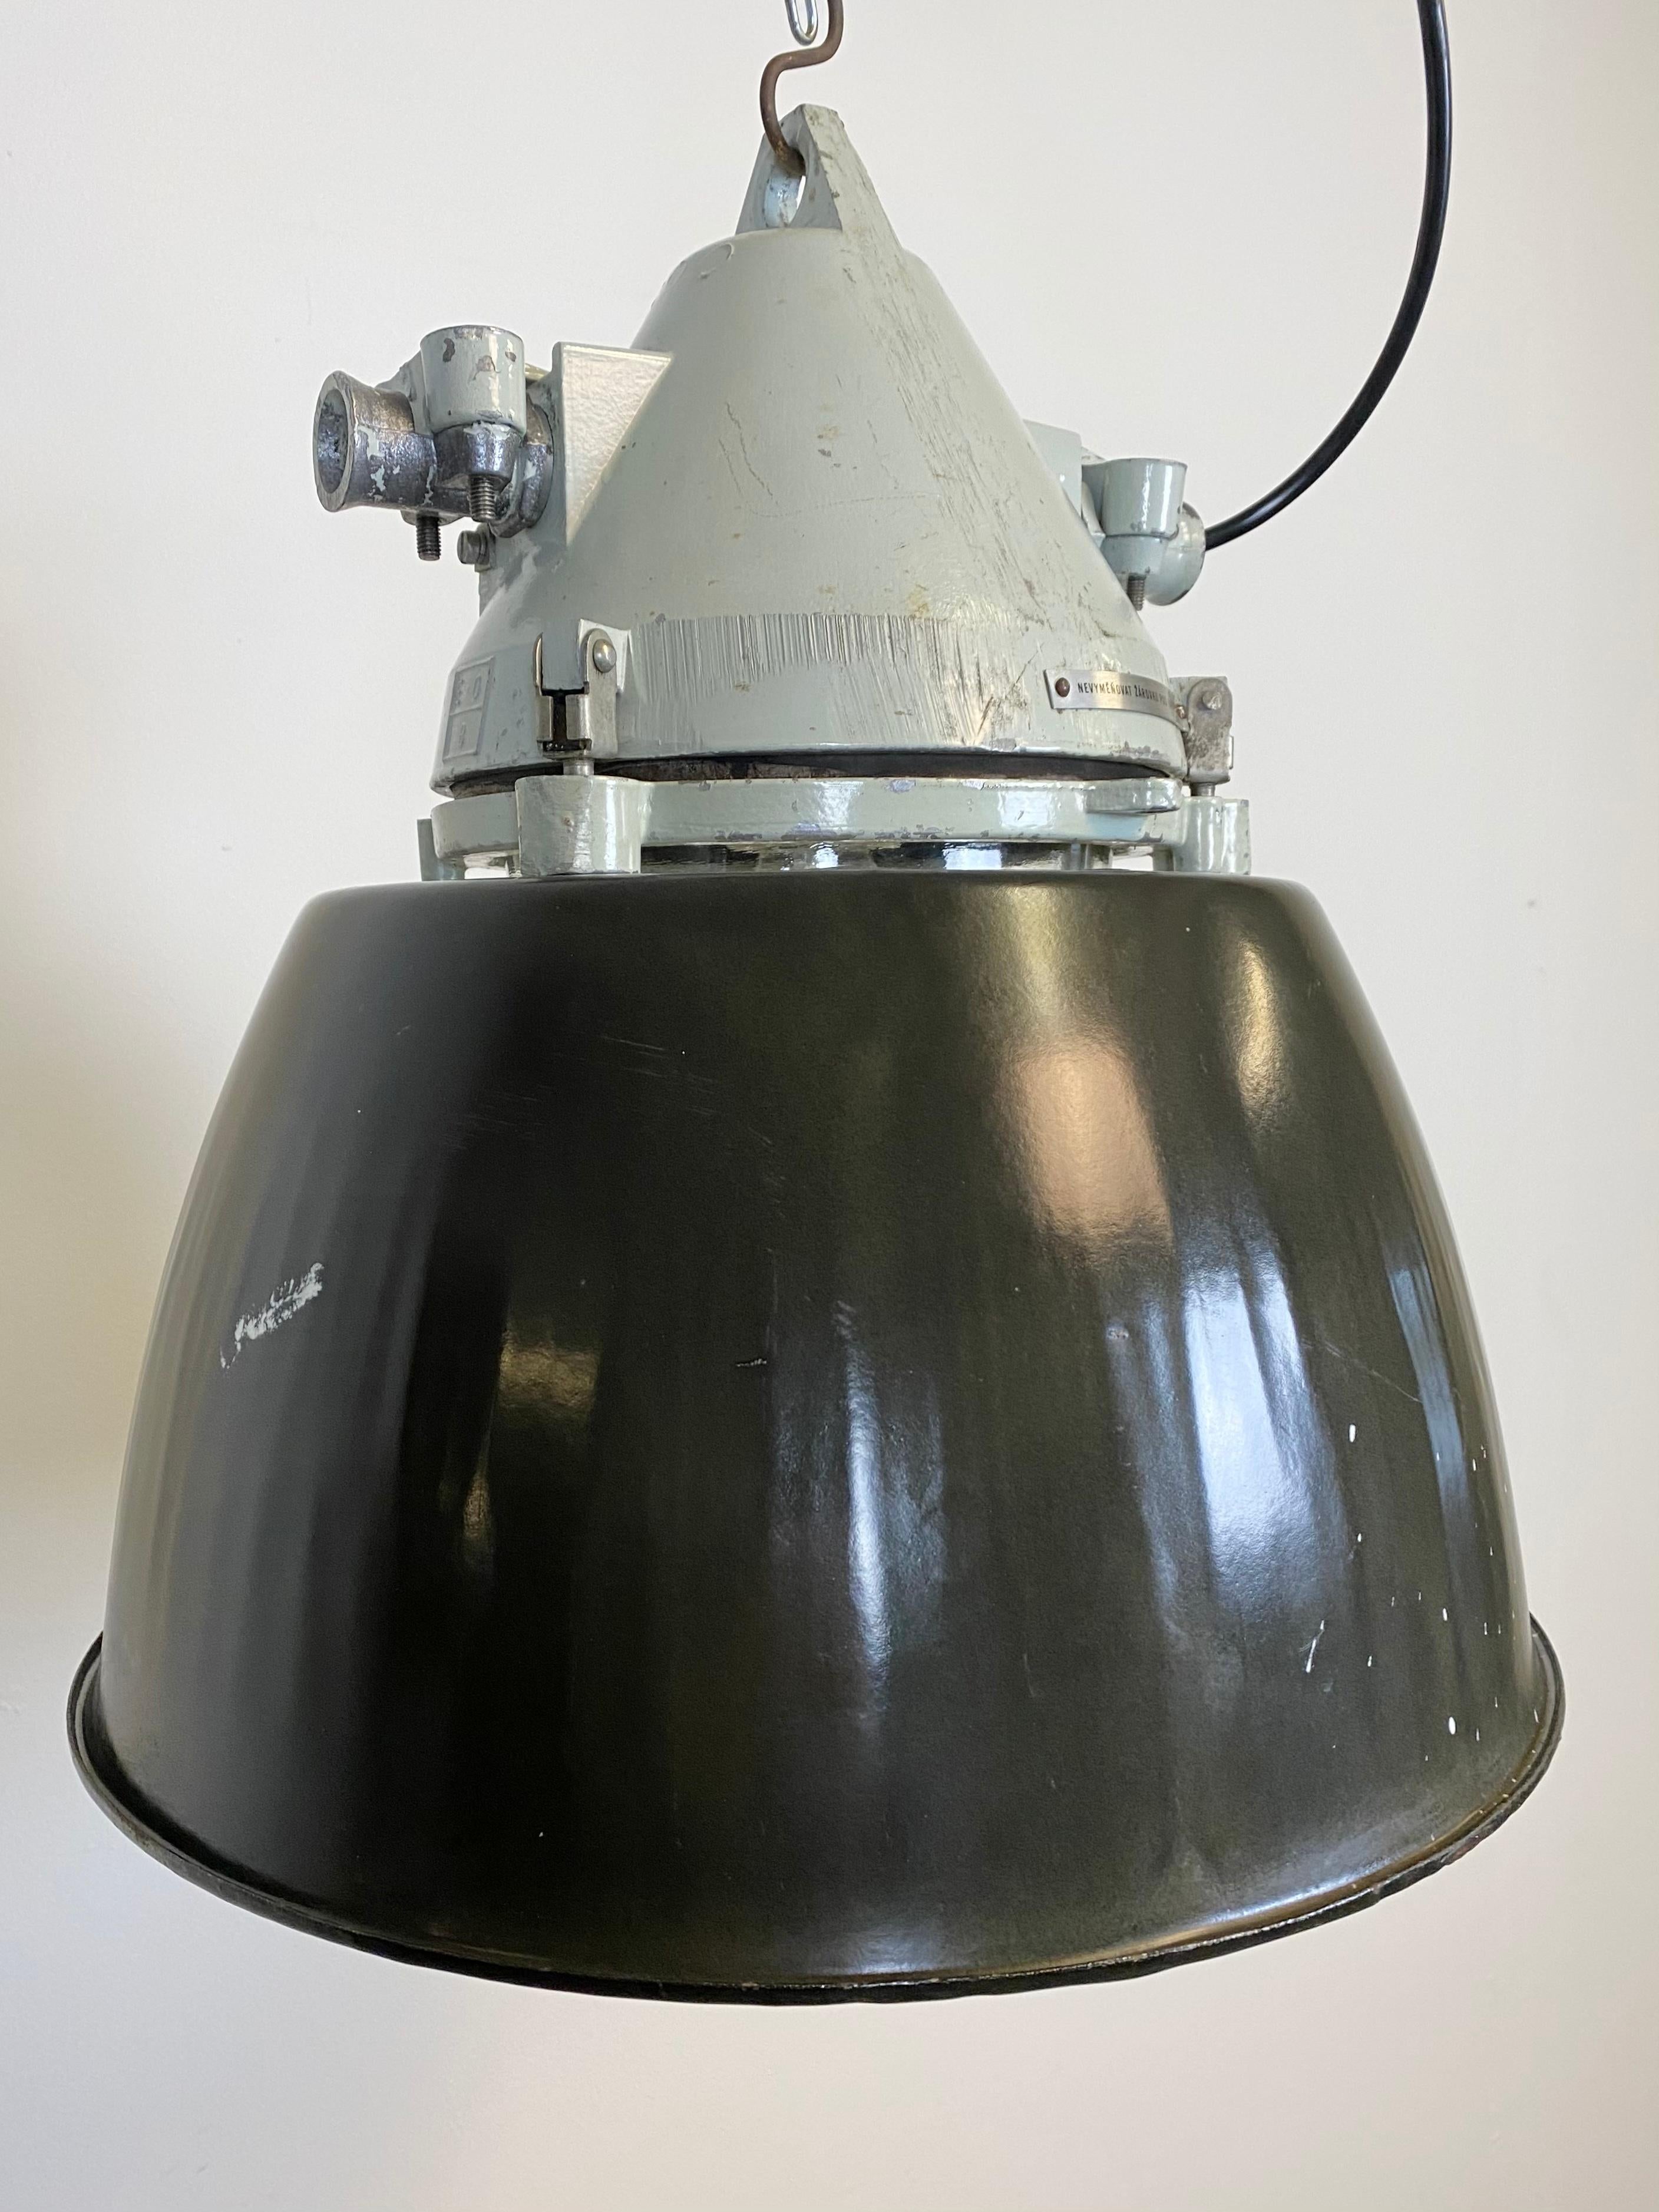 Grey industrial lamp with massive protective glass bulb made by Elektrosvit in former Czechoslovakia during the 1970s.It features a cast aluminium body, a clear glass and a black enameled shade with white interior. Porcelain socket requires E27